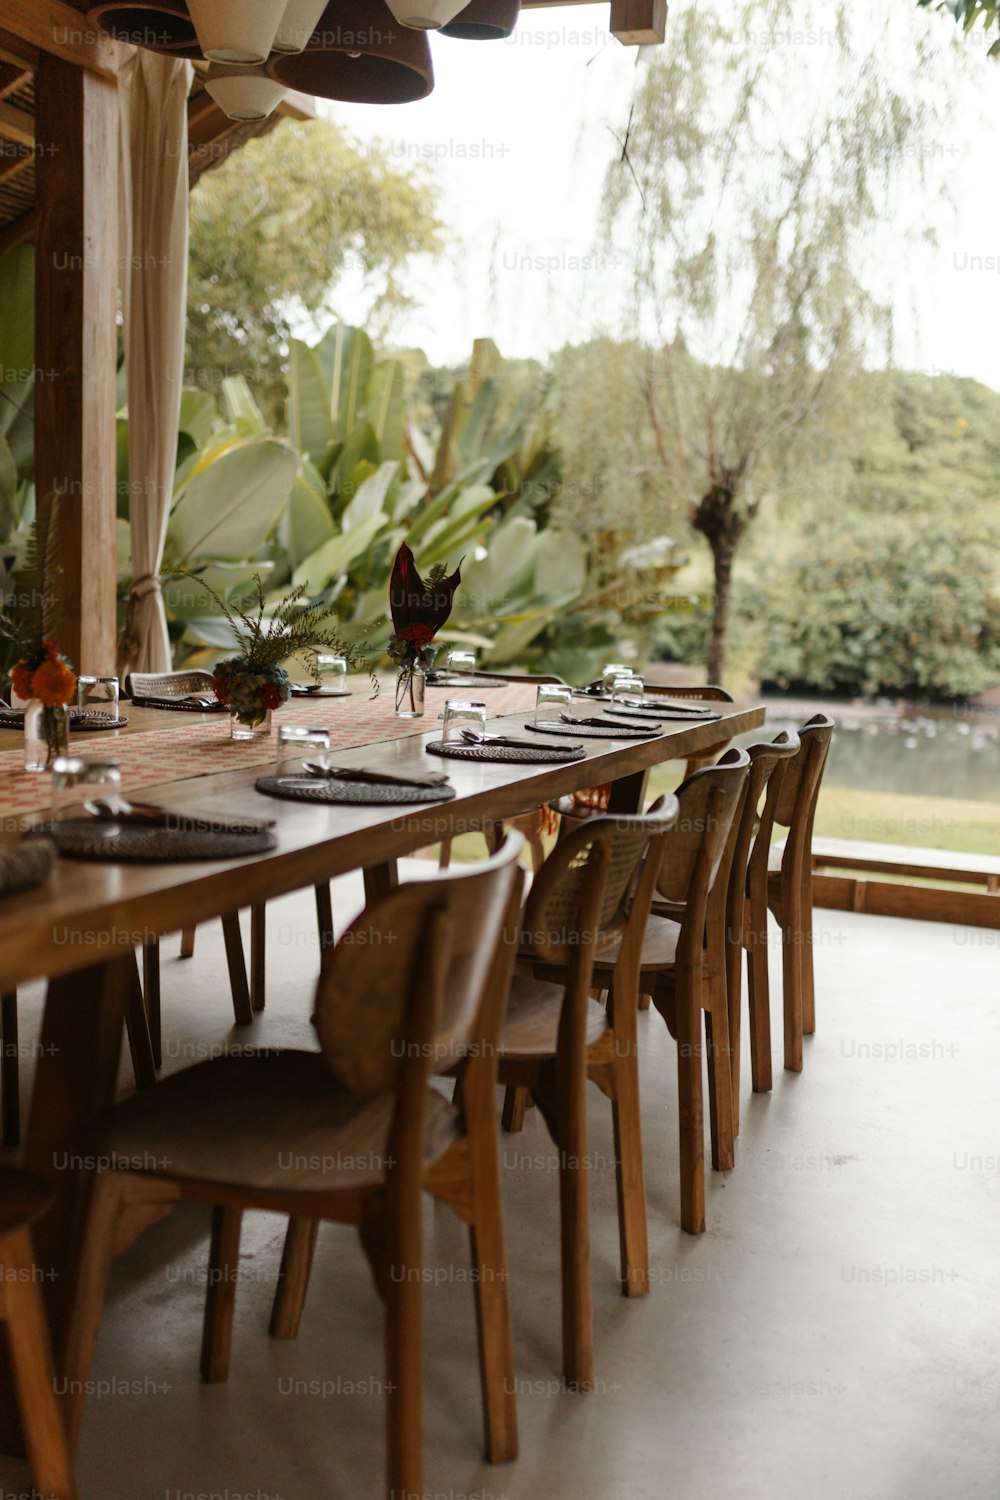 a long wooden table set with place settings